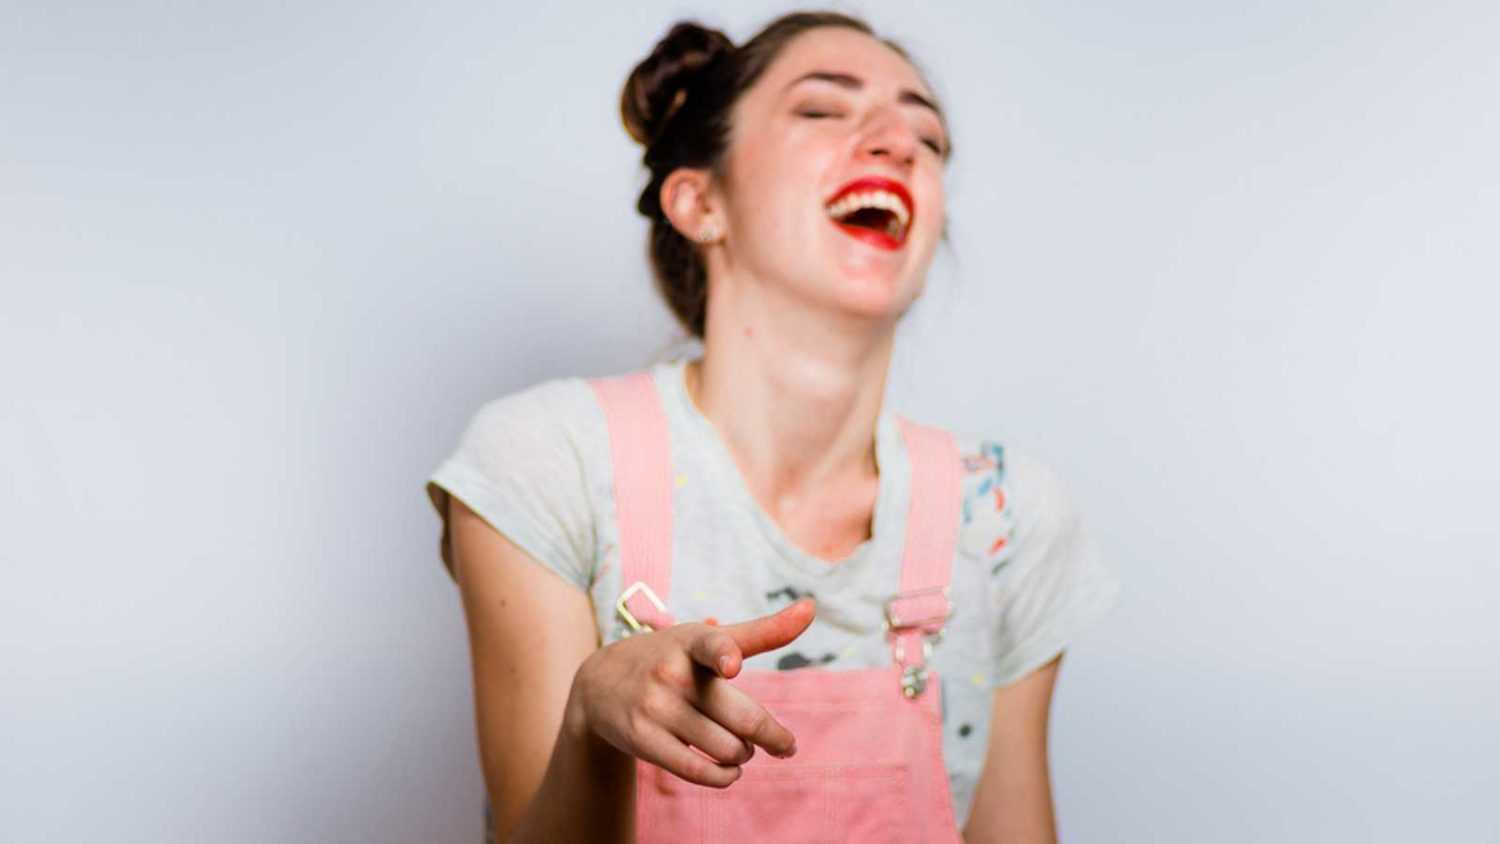 Woman pinpointing and laughing